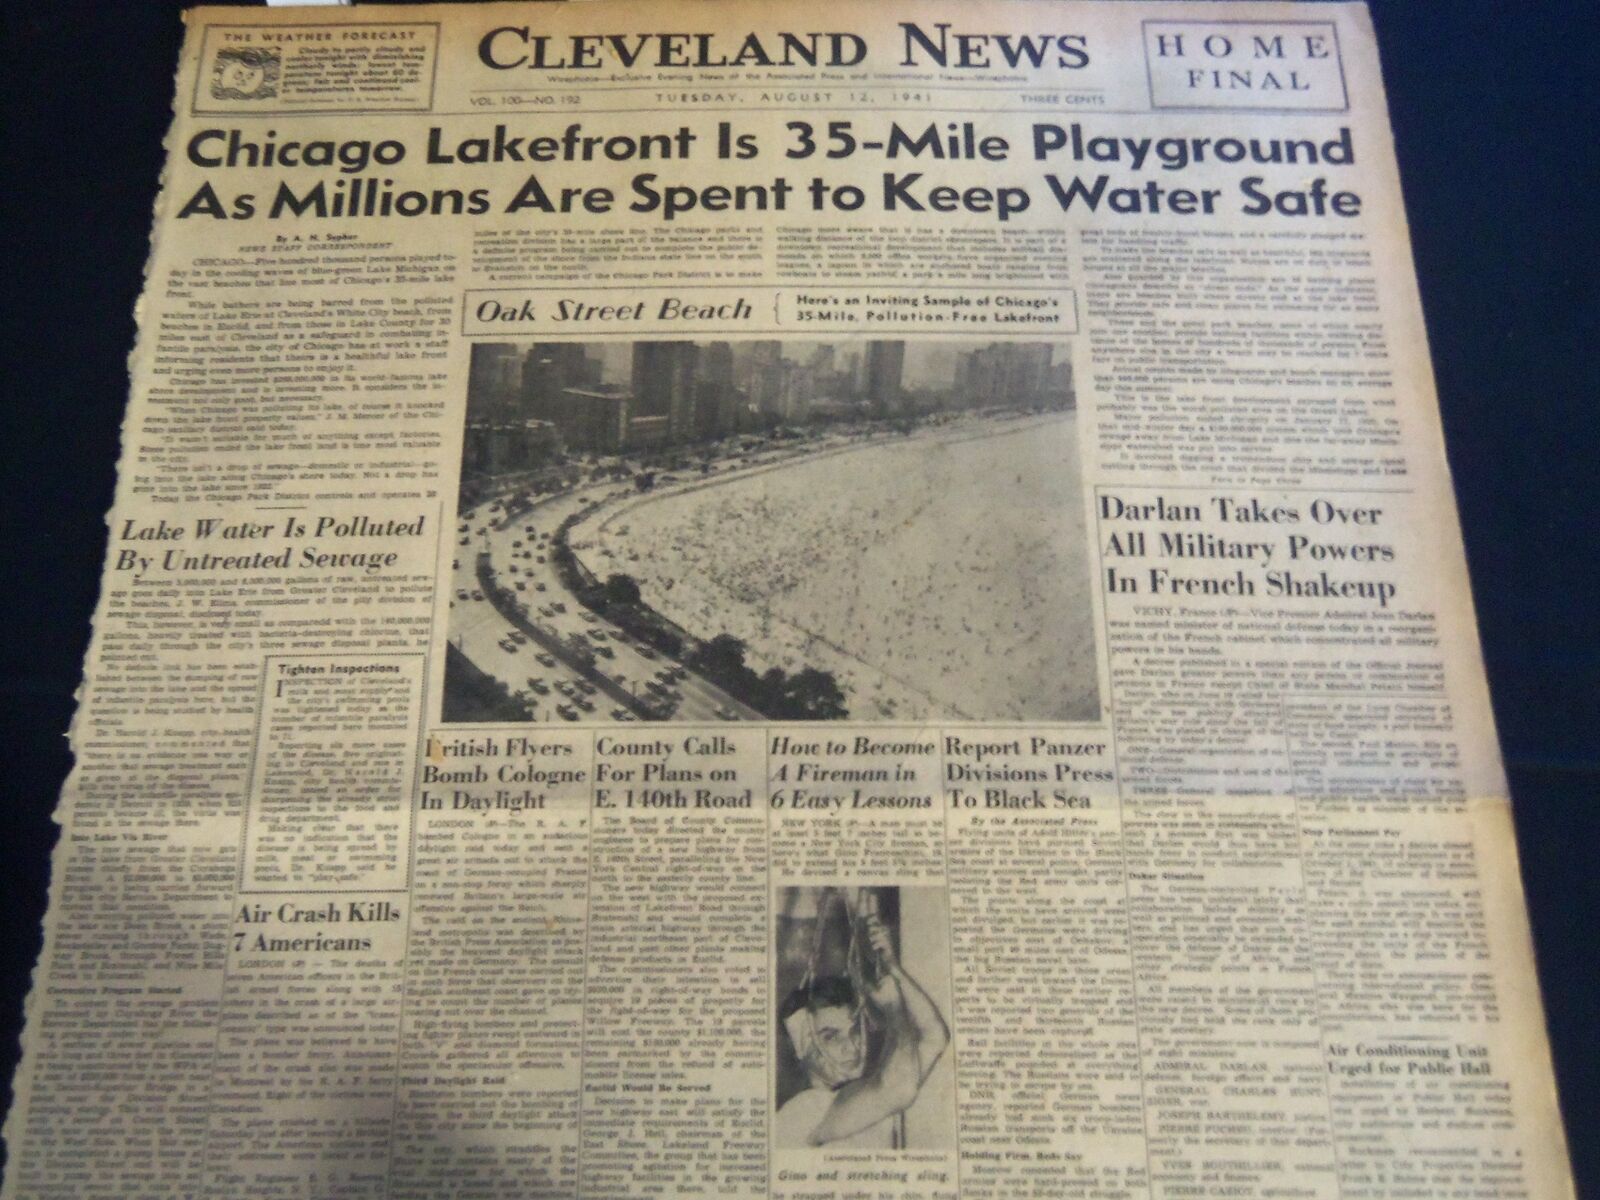 1941 AUGUST 12 CLEVELAND NEWS NEWSPAPER - CHICAGO LAKEFRONT IS 35 MILE - NT 7406